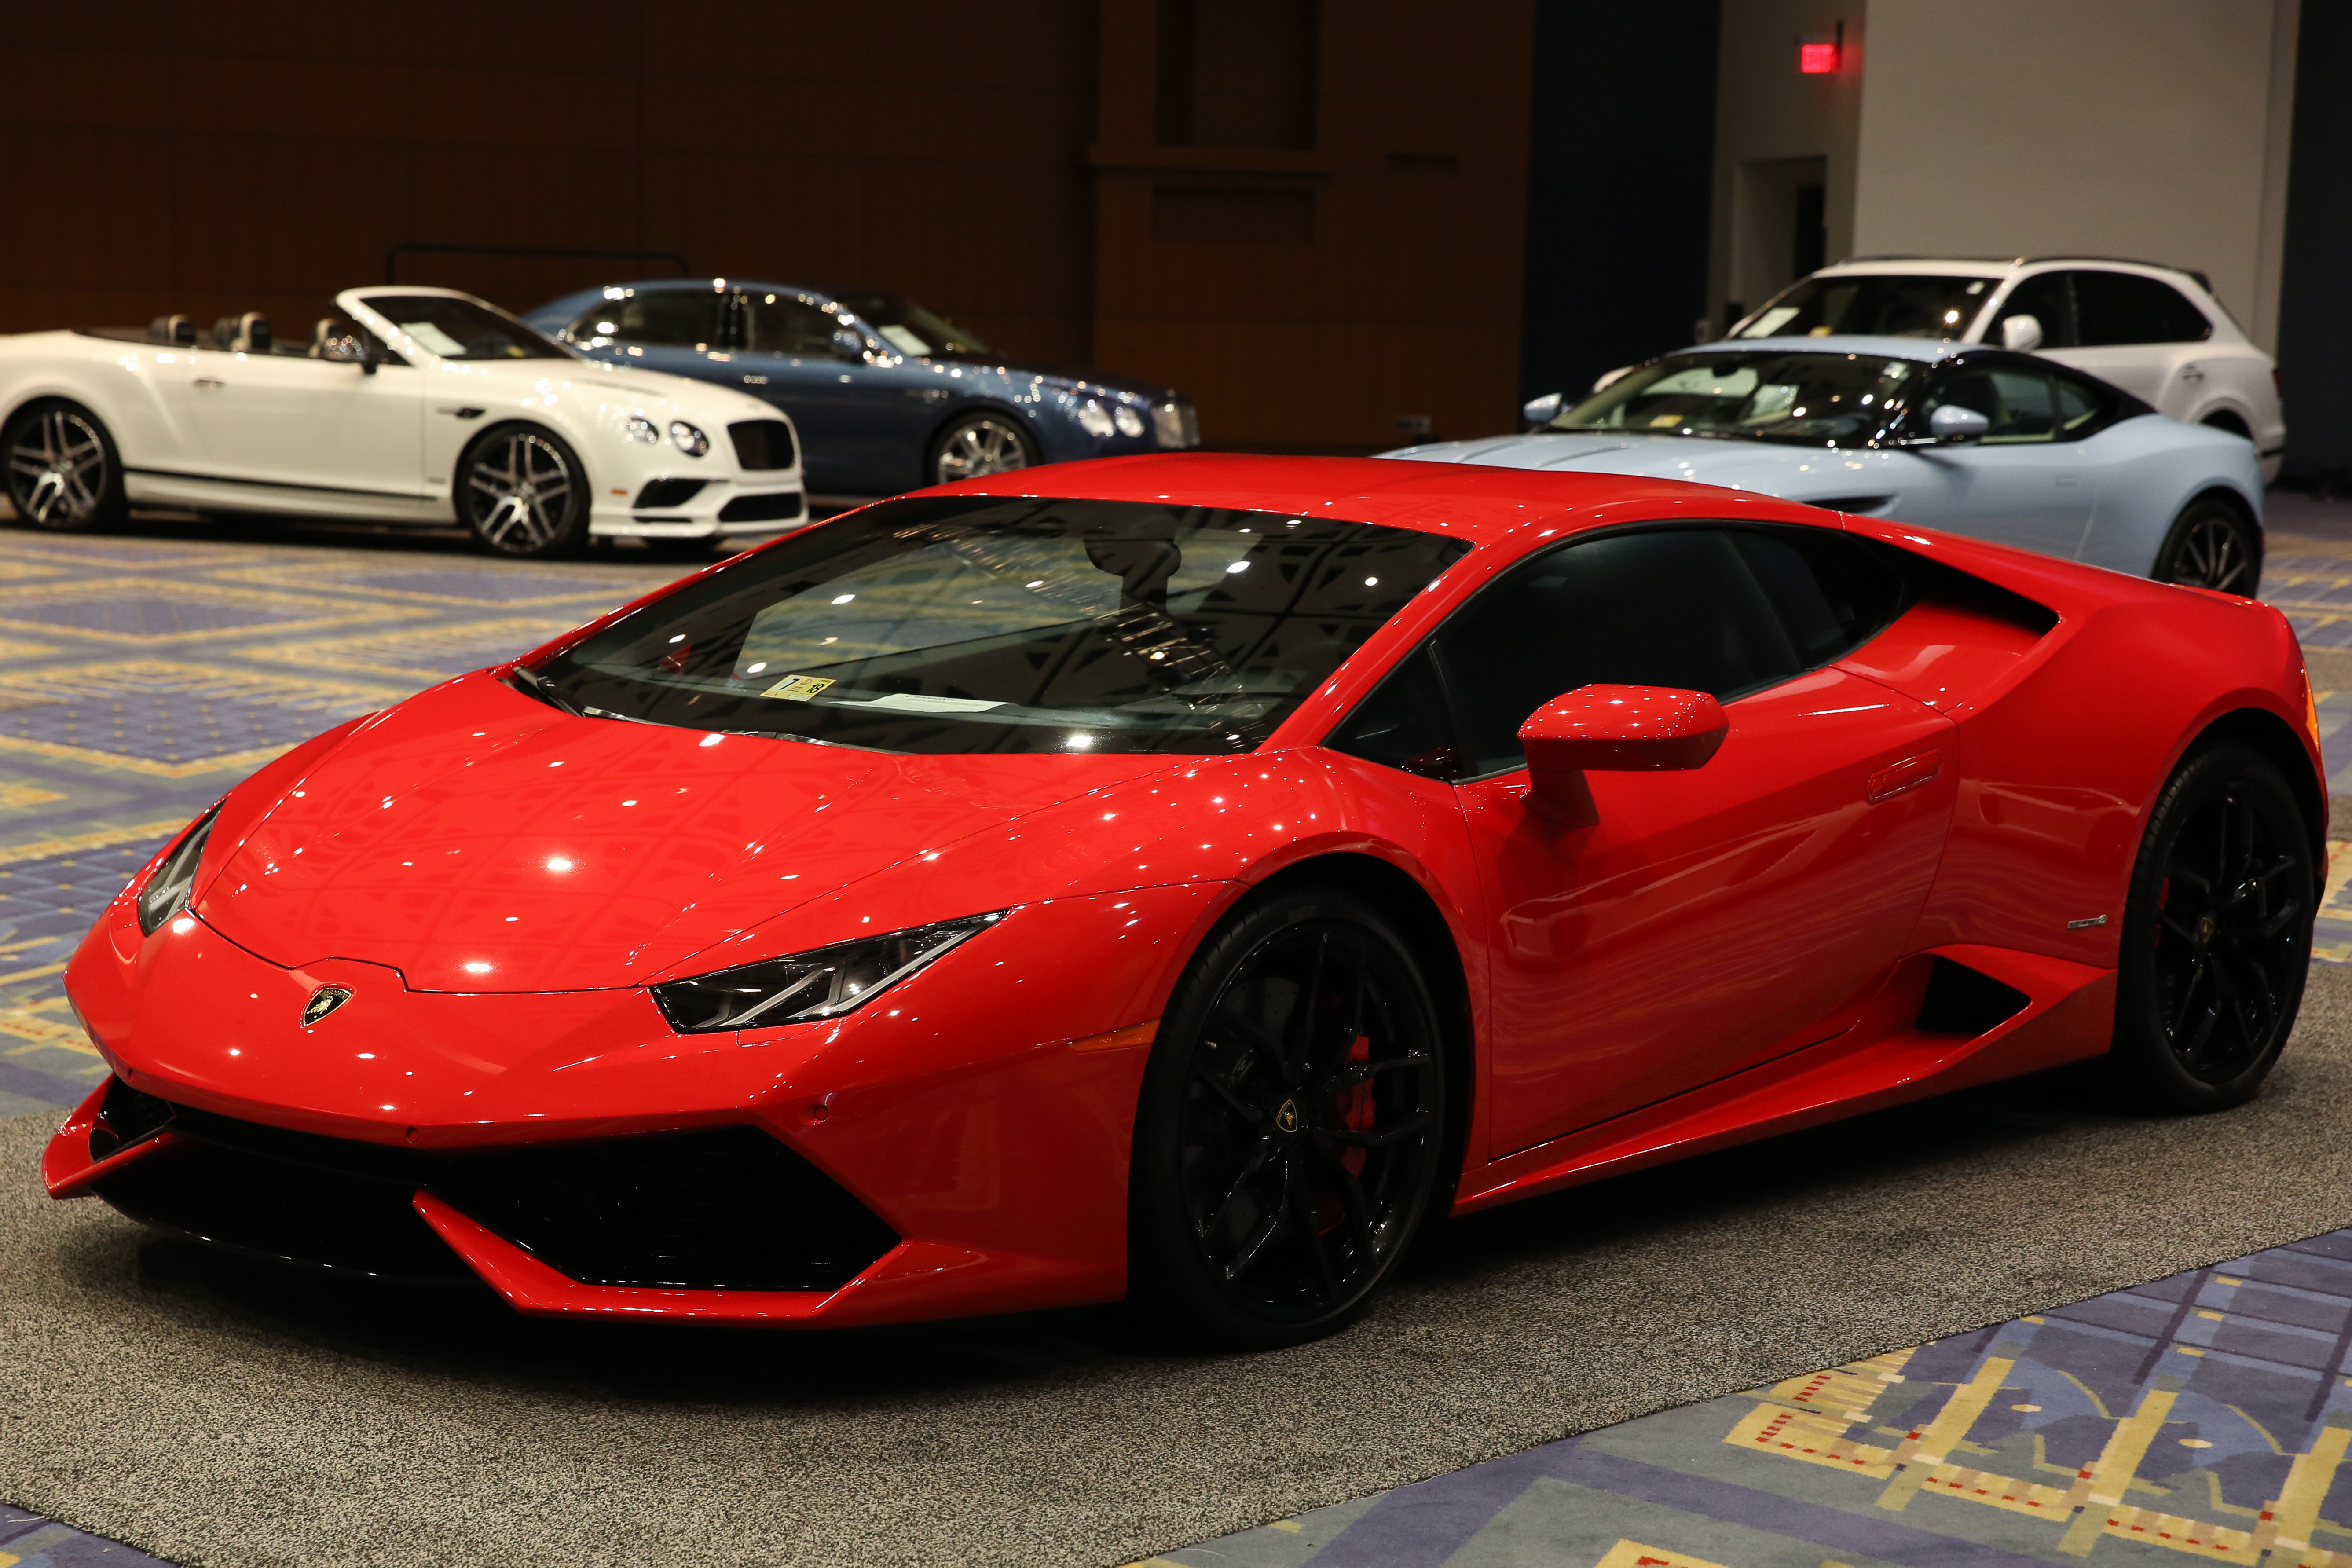 The Washington Auto Show brought the coolest cars to D.C. DC Refined